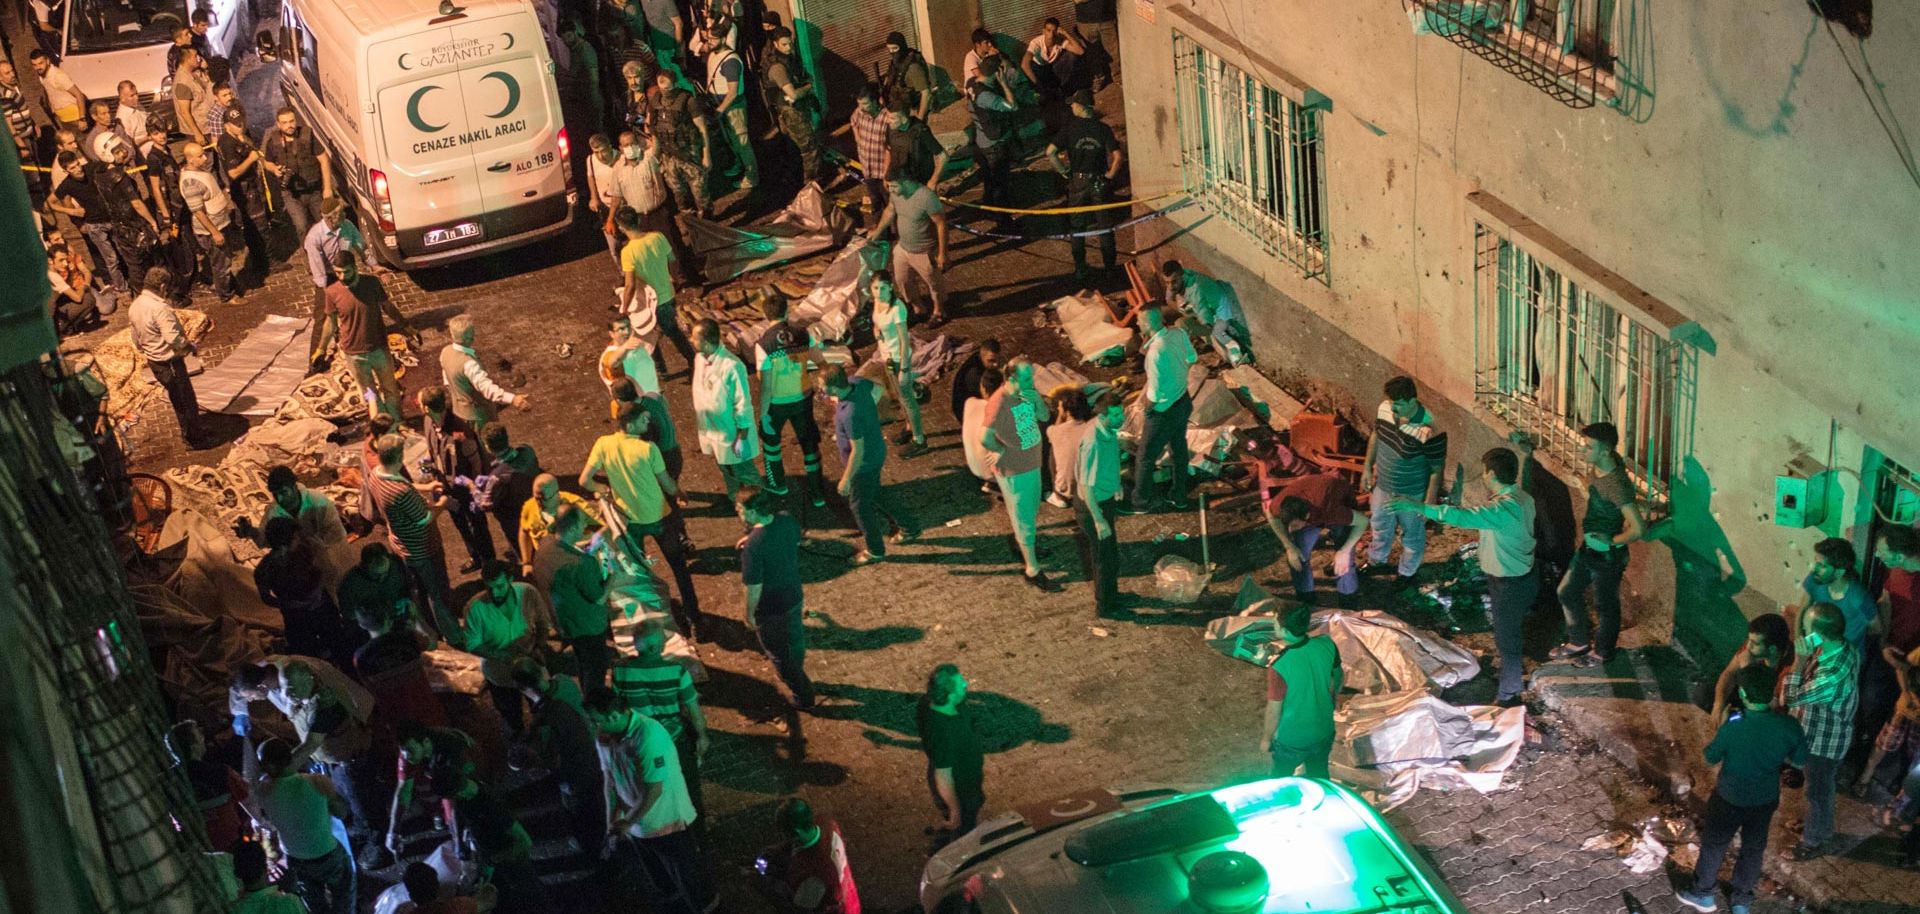 The scene of an explosion on Aug. 20, 2016, in Gaziantep, Turkey, after a late-night militant attack on a wedding party that Turkish President Recep Tayyip Erdogan said the Islamic State was behind.